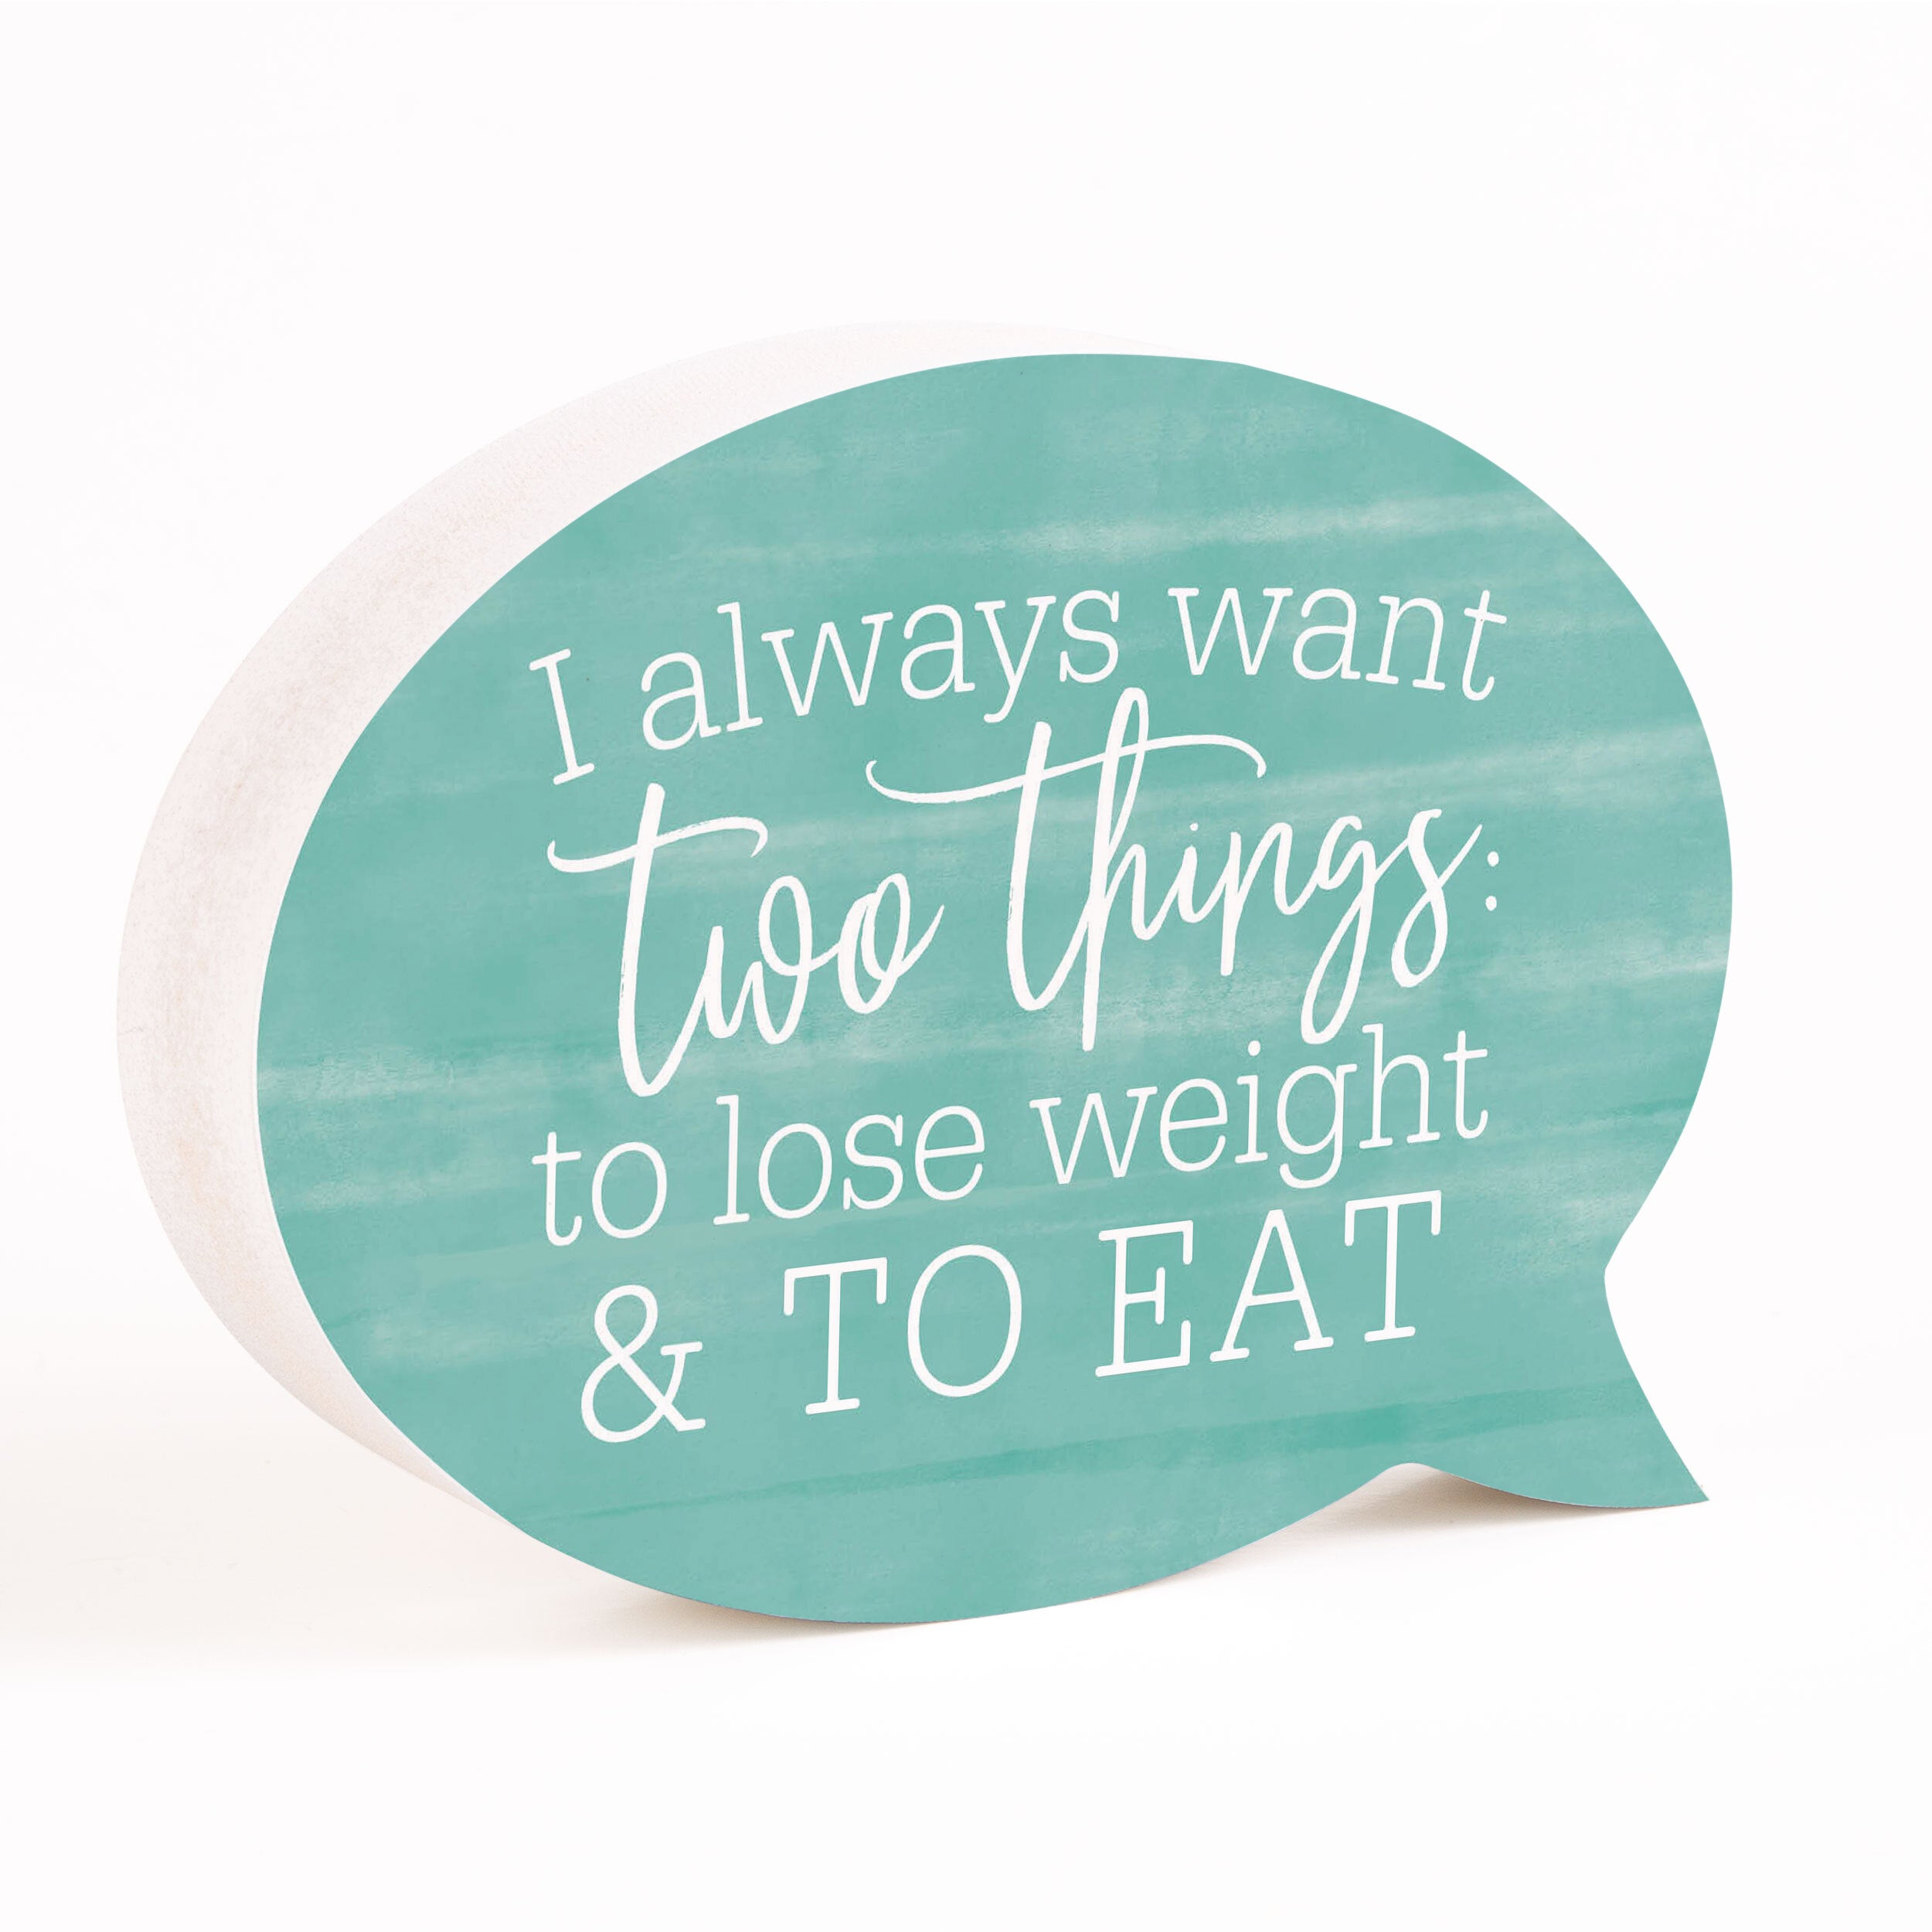 **I Always Want Two Things To Lose Weight And To Eat Word Bubble